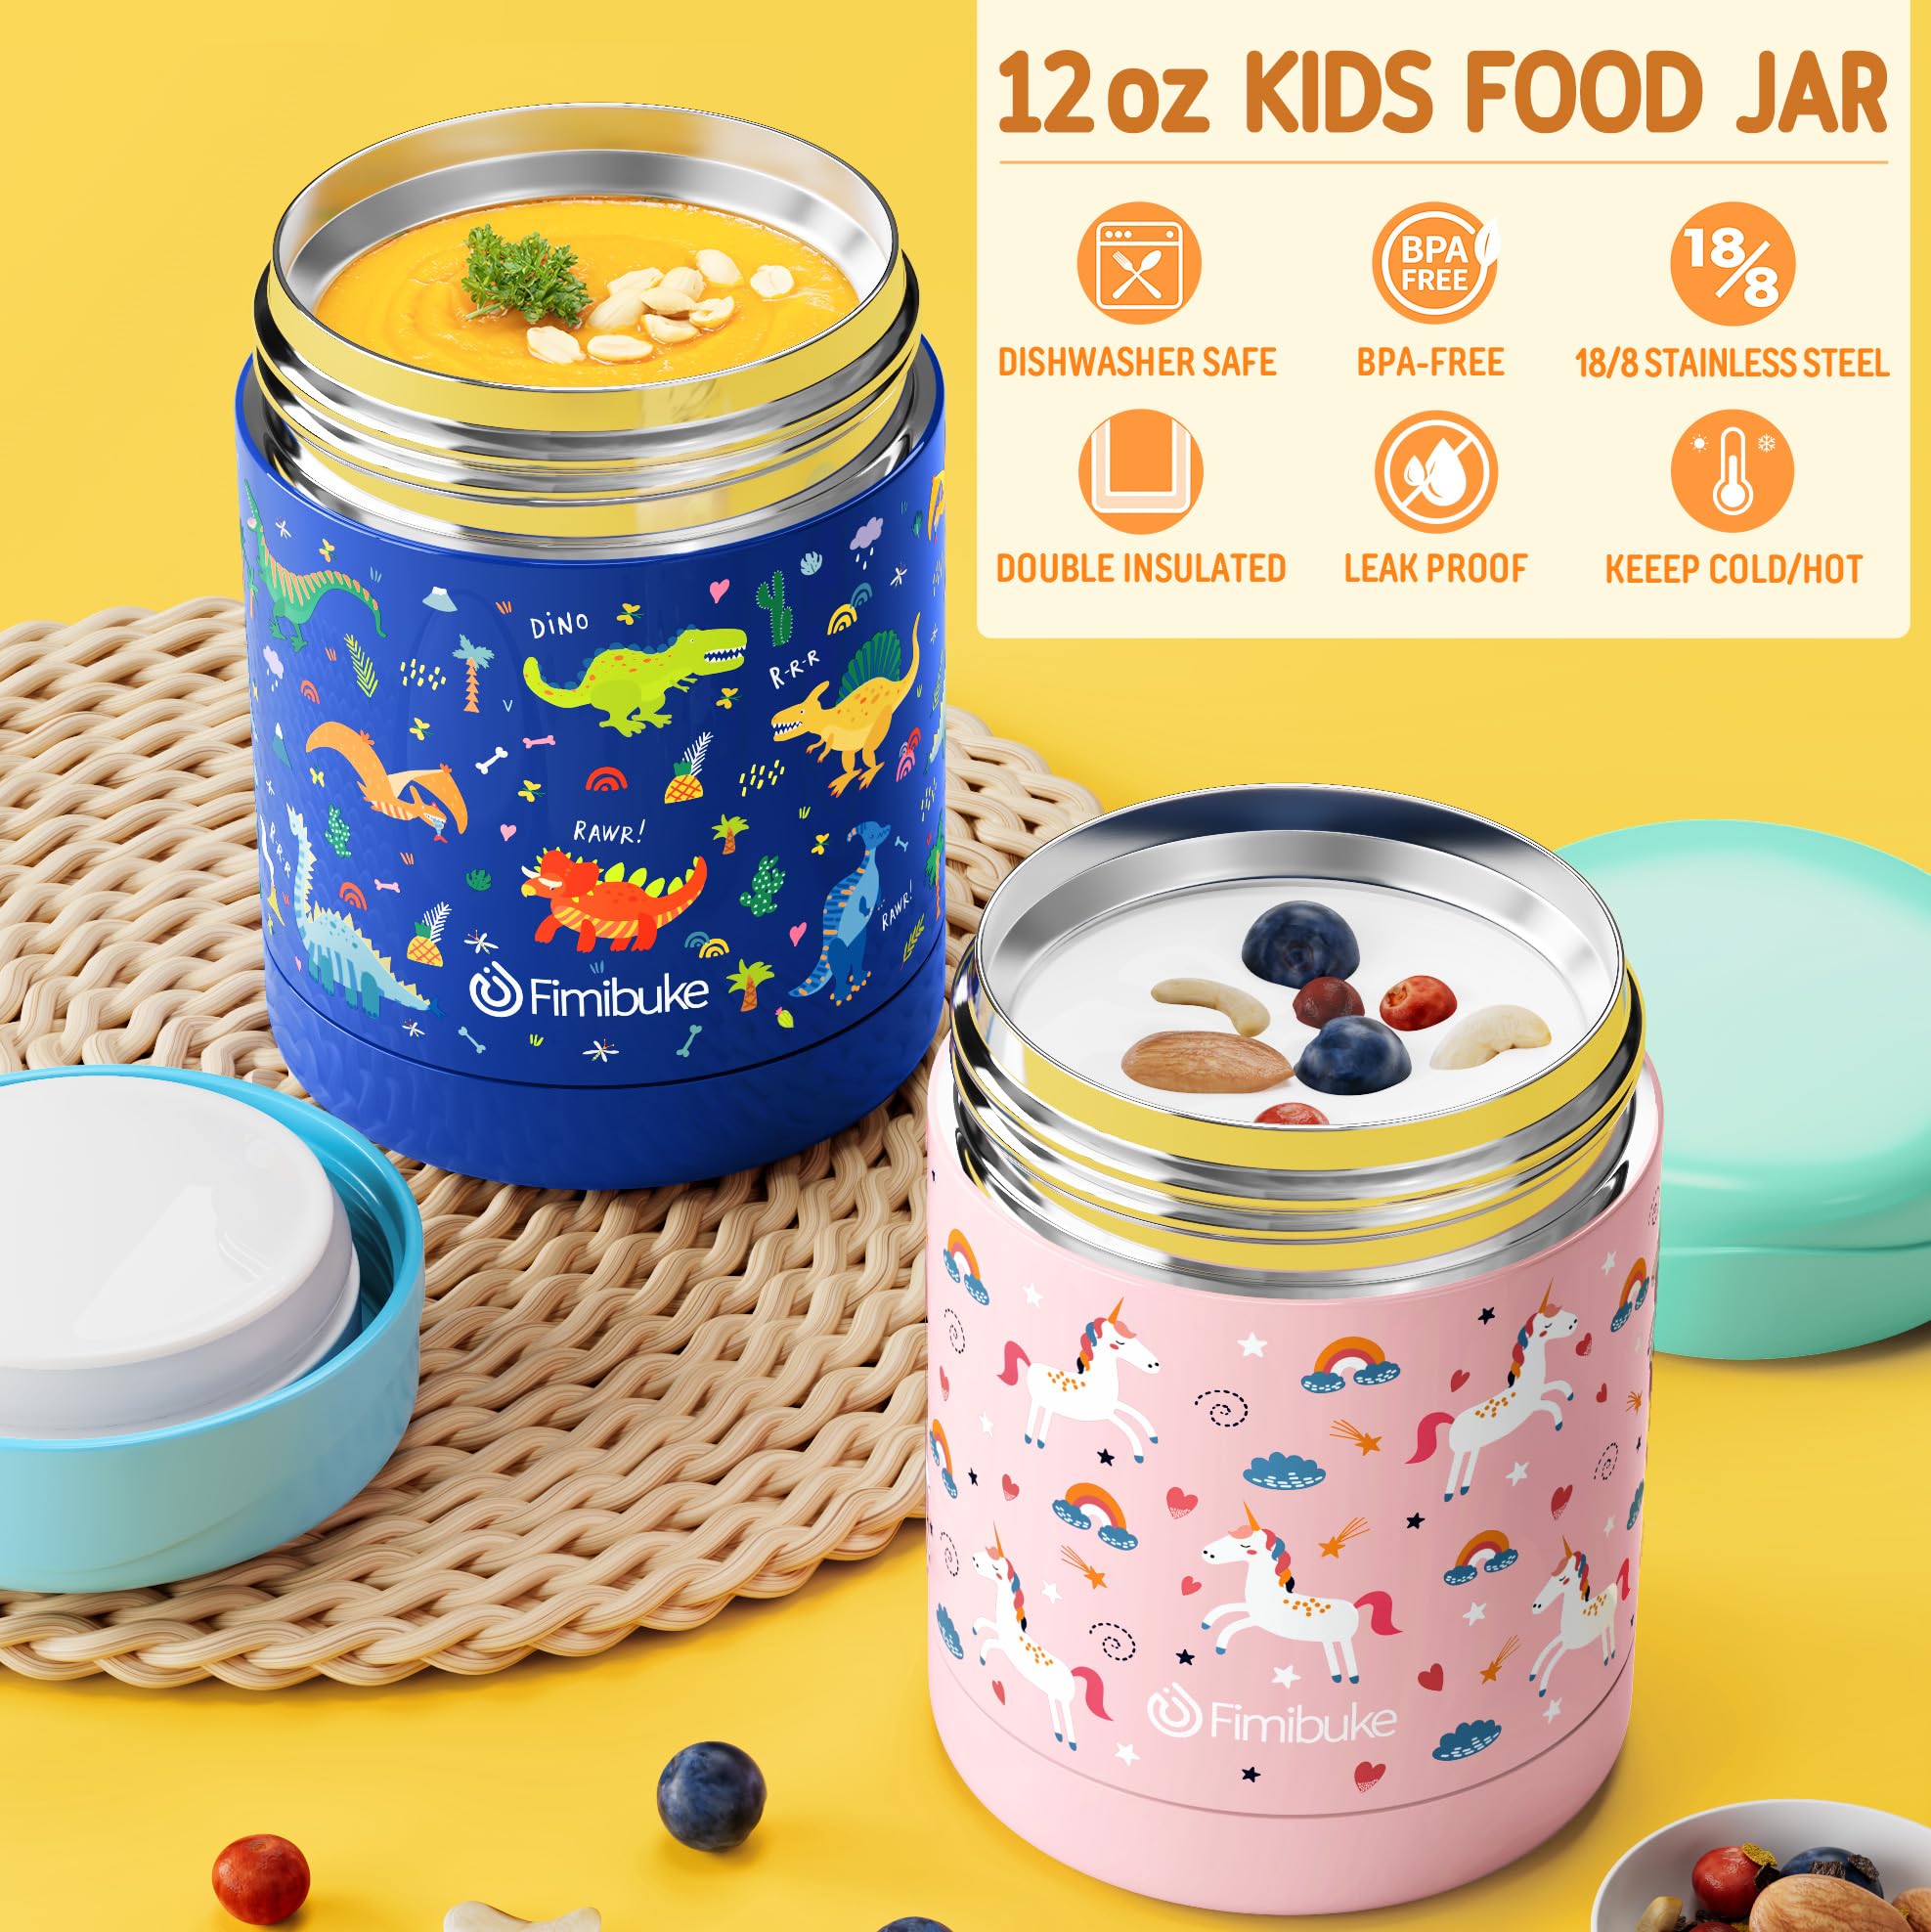 Fimibuke Kids Bento Snack Lunch Box with 4 Compartment, Insulated lunch Bag, Stainless Steel Vacuum Thermos Food Jar, Ice Pack, Utensils Set, Birthday Gift for Age 3-12 Back to School Toddler Girl Boy